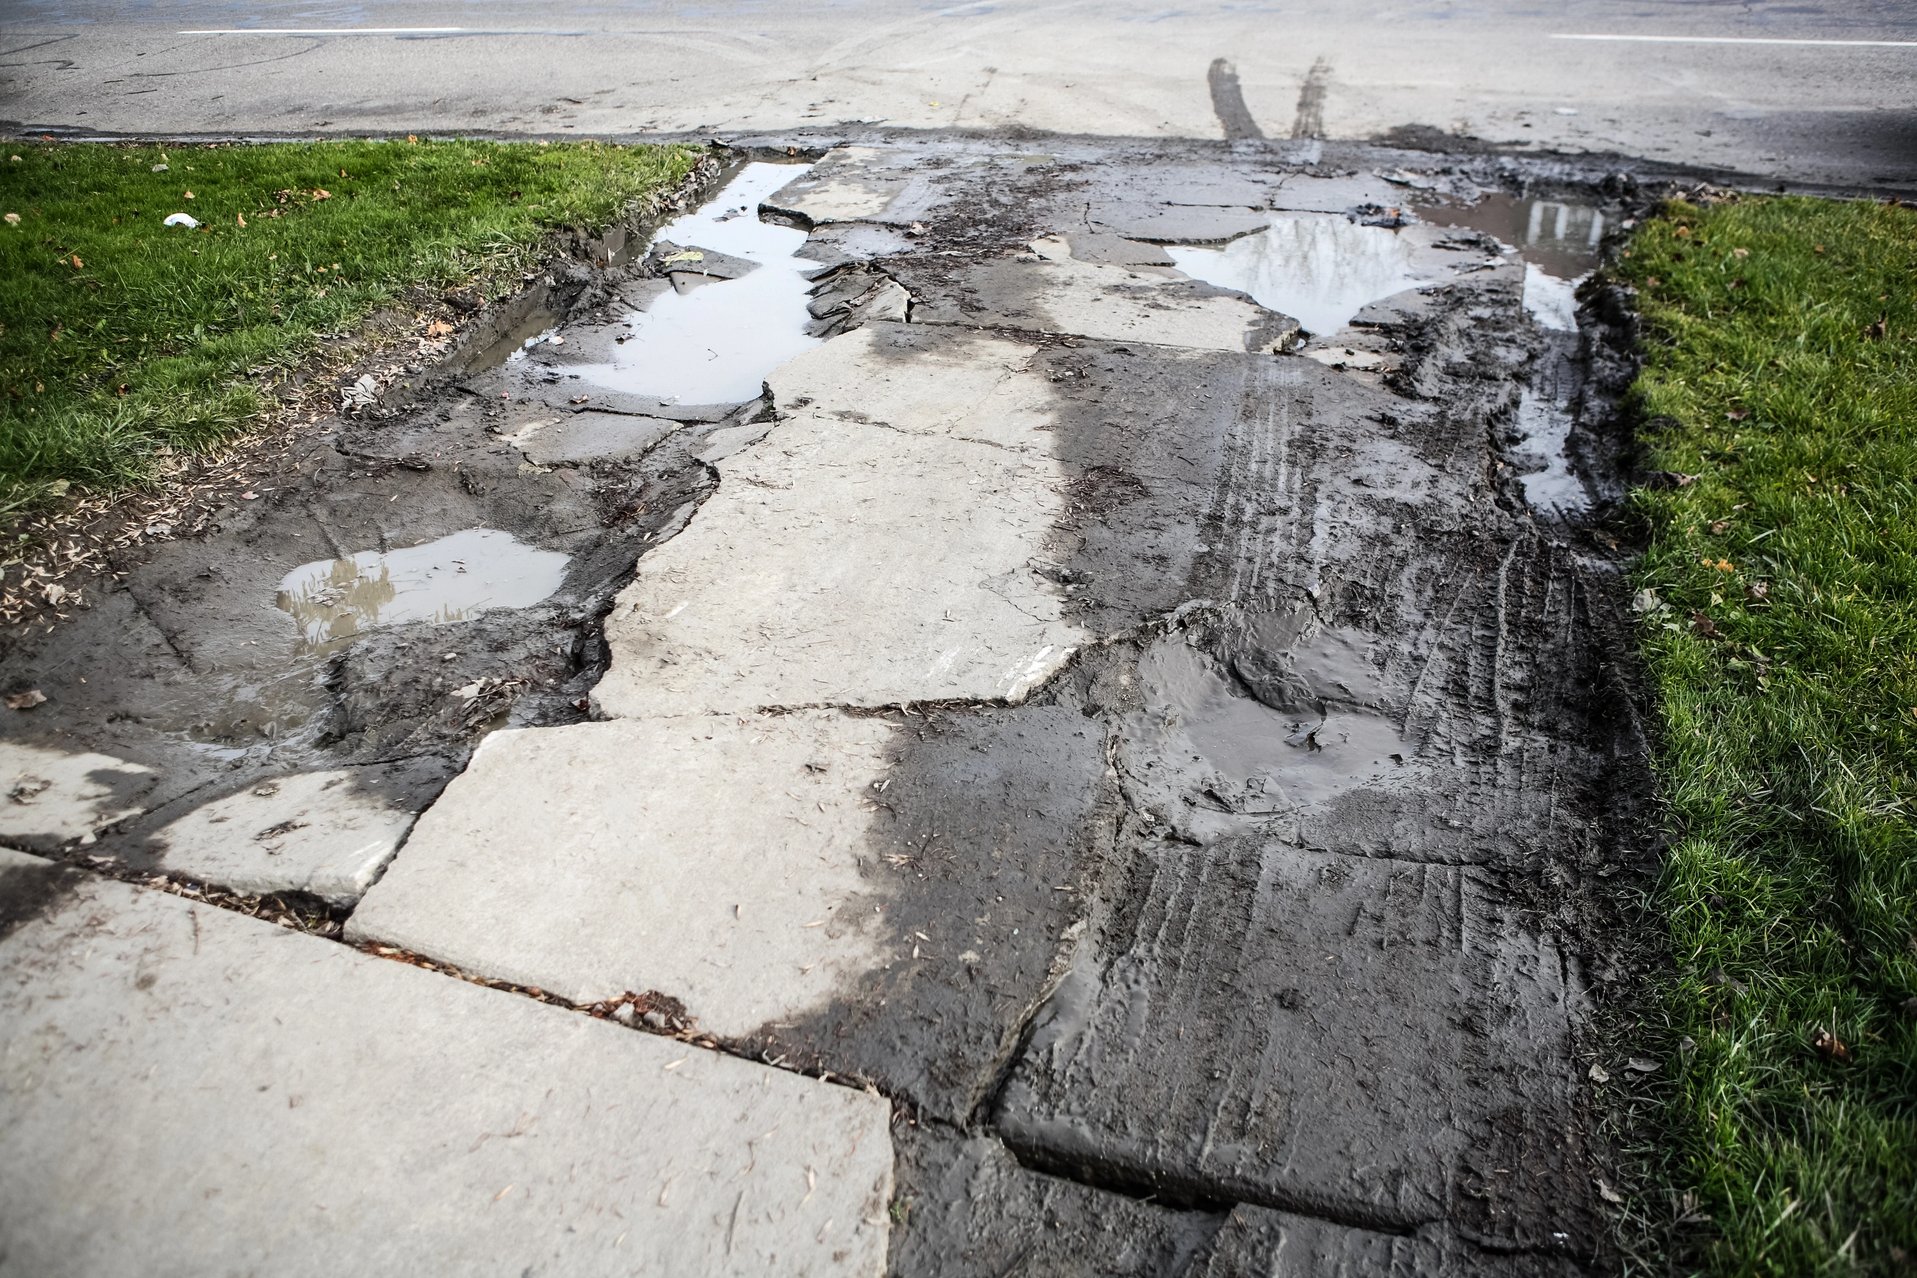 Damaged driveway with uneven and cracked concrete, showing the need for professional repair services.